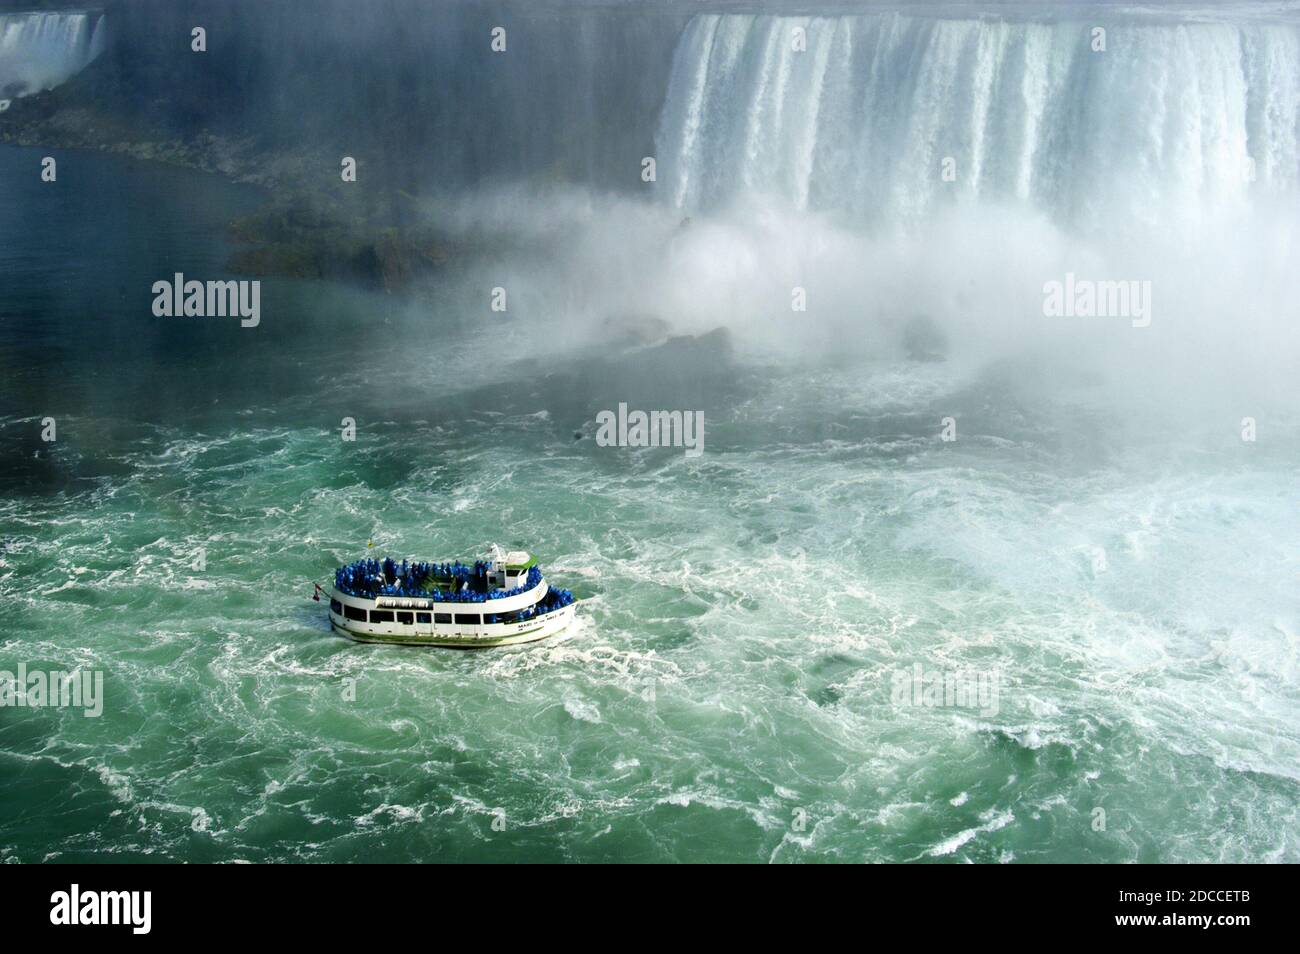 The Niagra Falls waterfalls viewed from the Canadian side with the Maid of the Mist tourist boat in the foreground Stock Photo